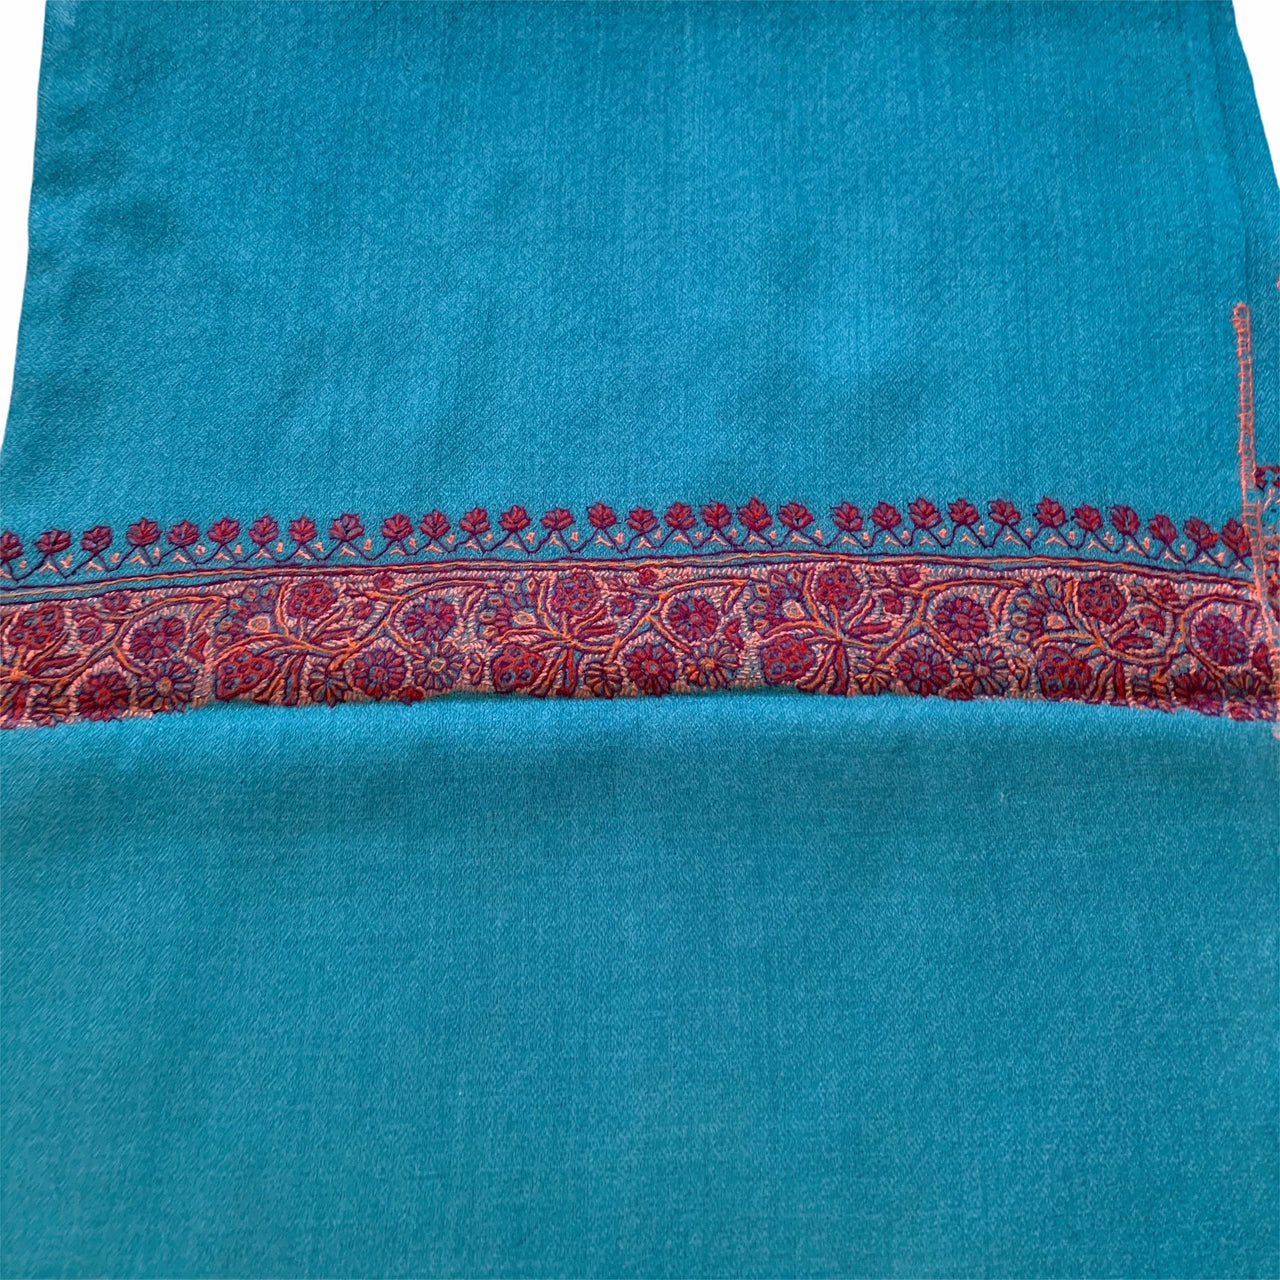 Teal Cashmere Pashmina Hand embroidered Scarf/Shawl/Wrap/Stole